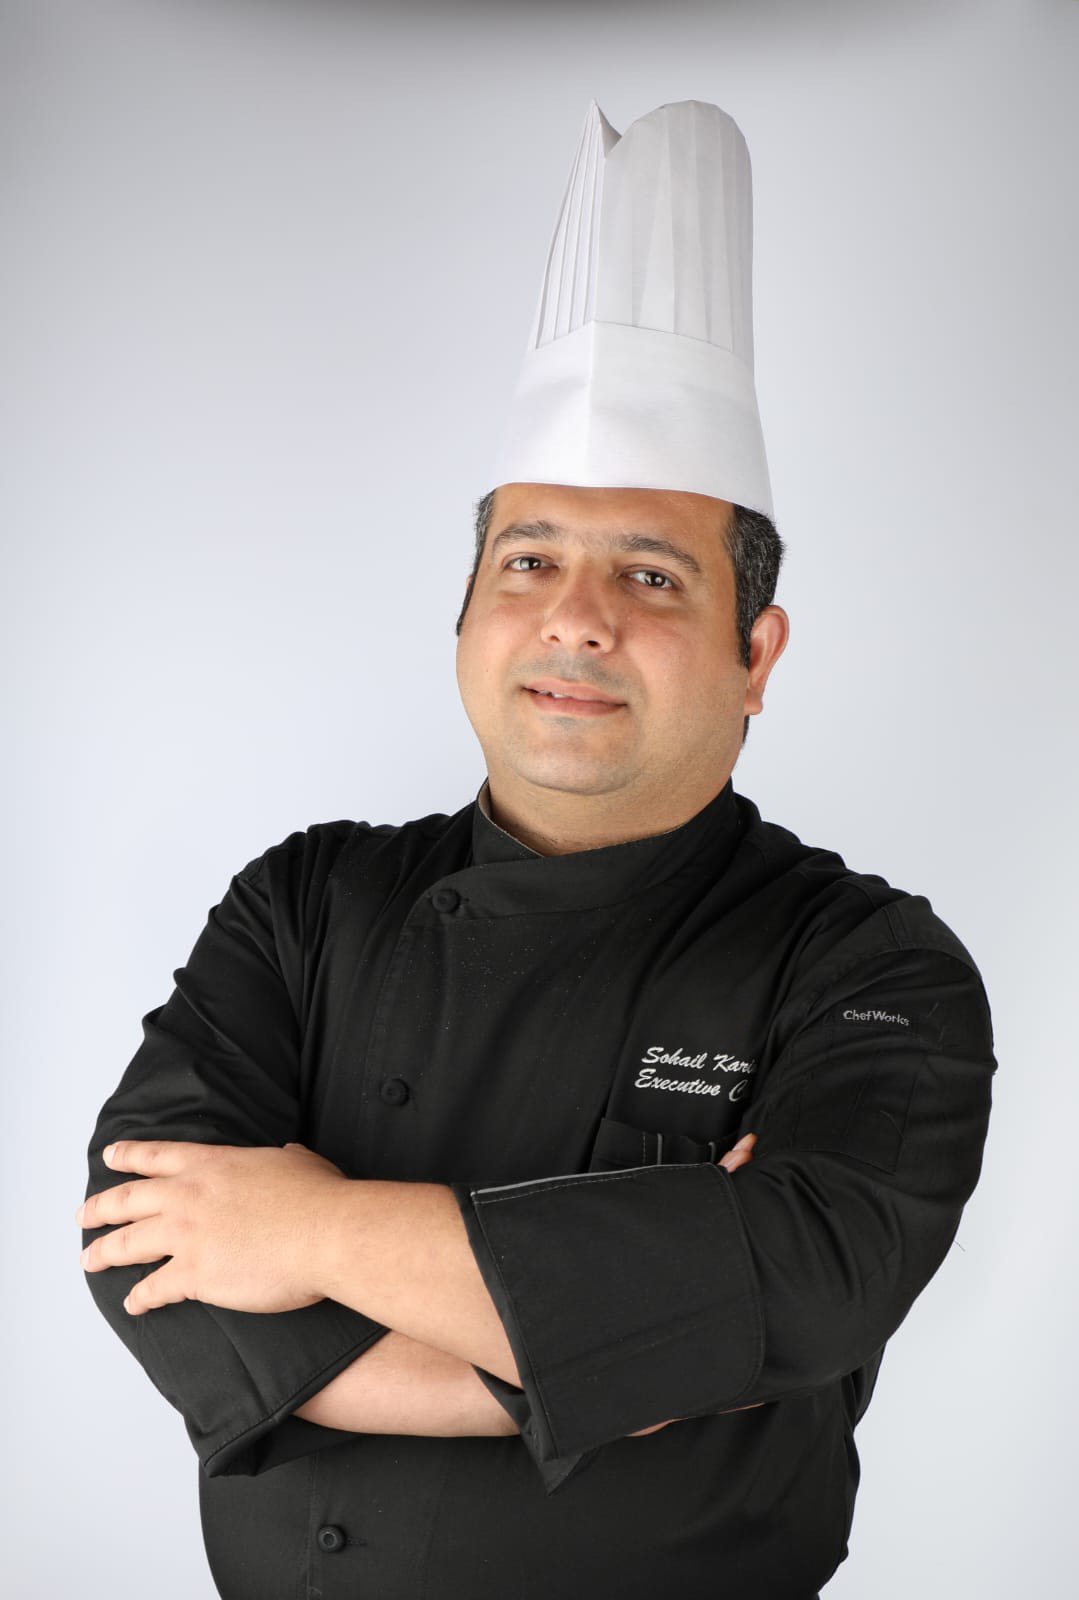 Radisson Blu Resort & Spa Karjat is delighted to announce the appointment of Sohail Karimi as the new Executive Chef.